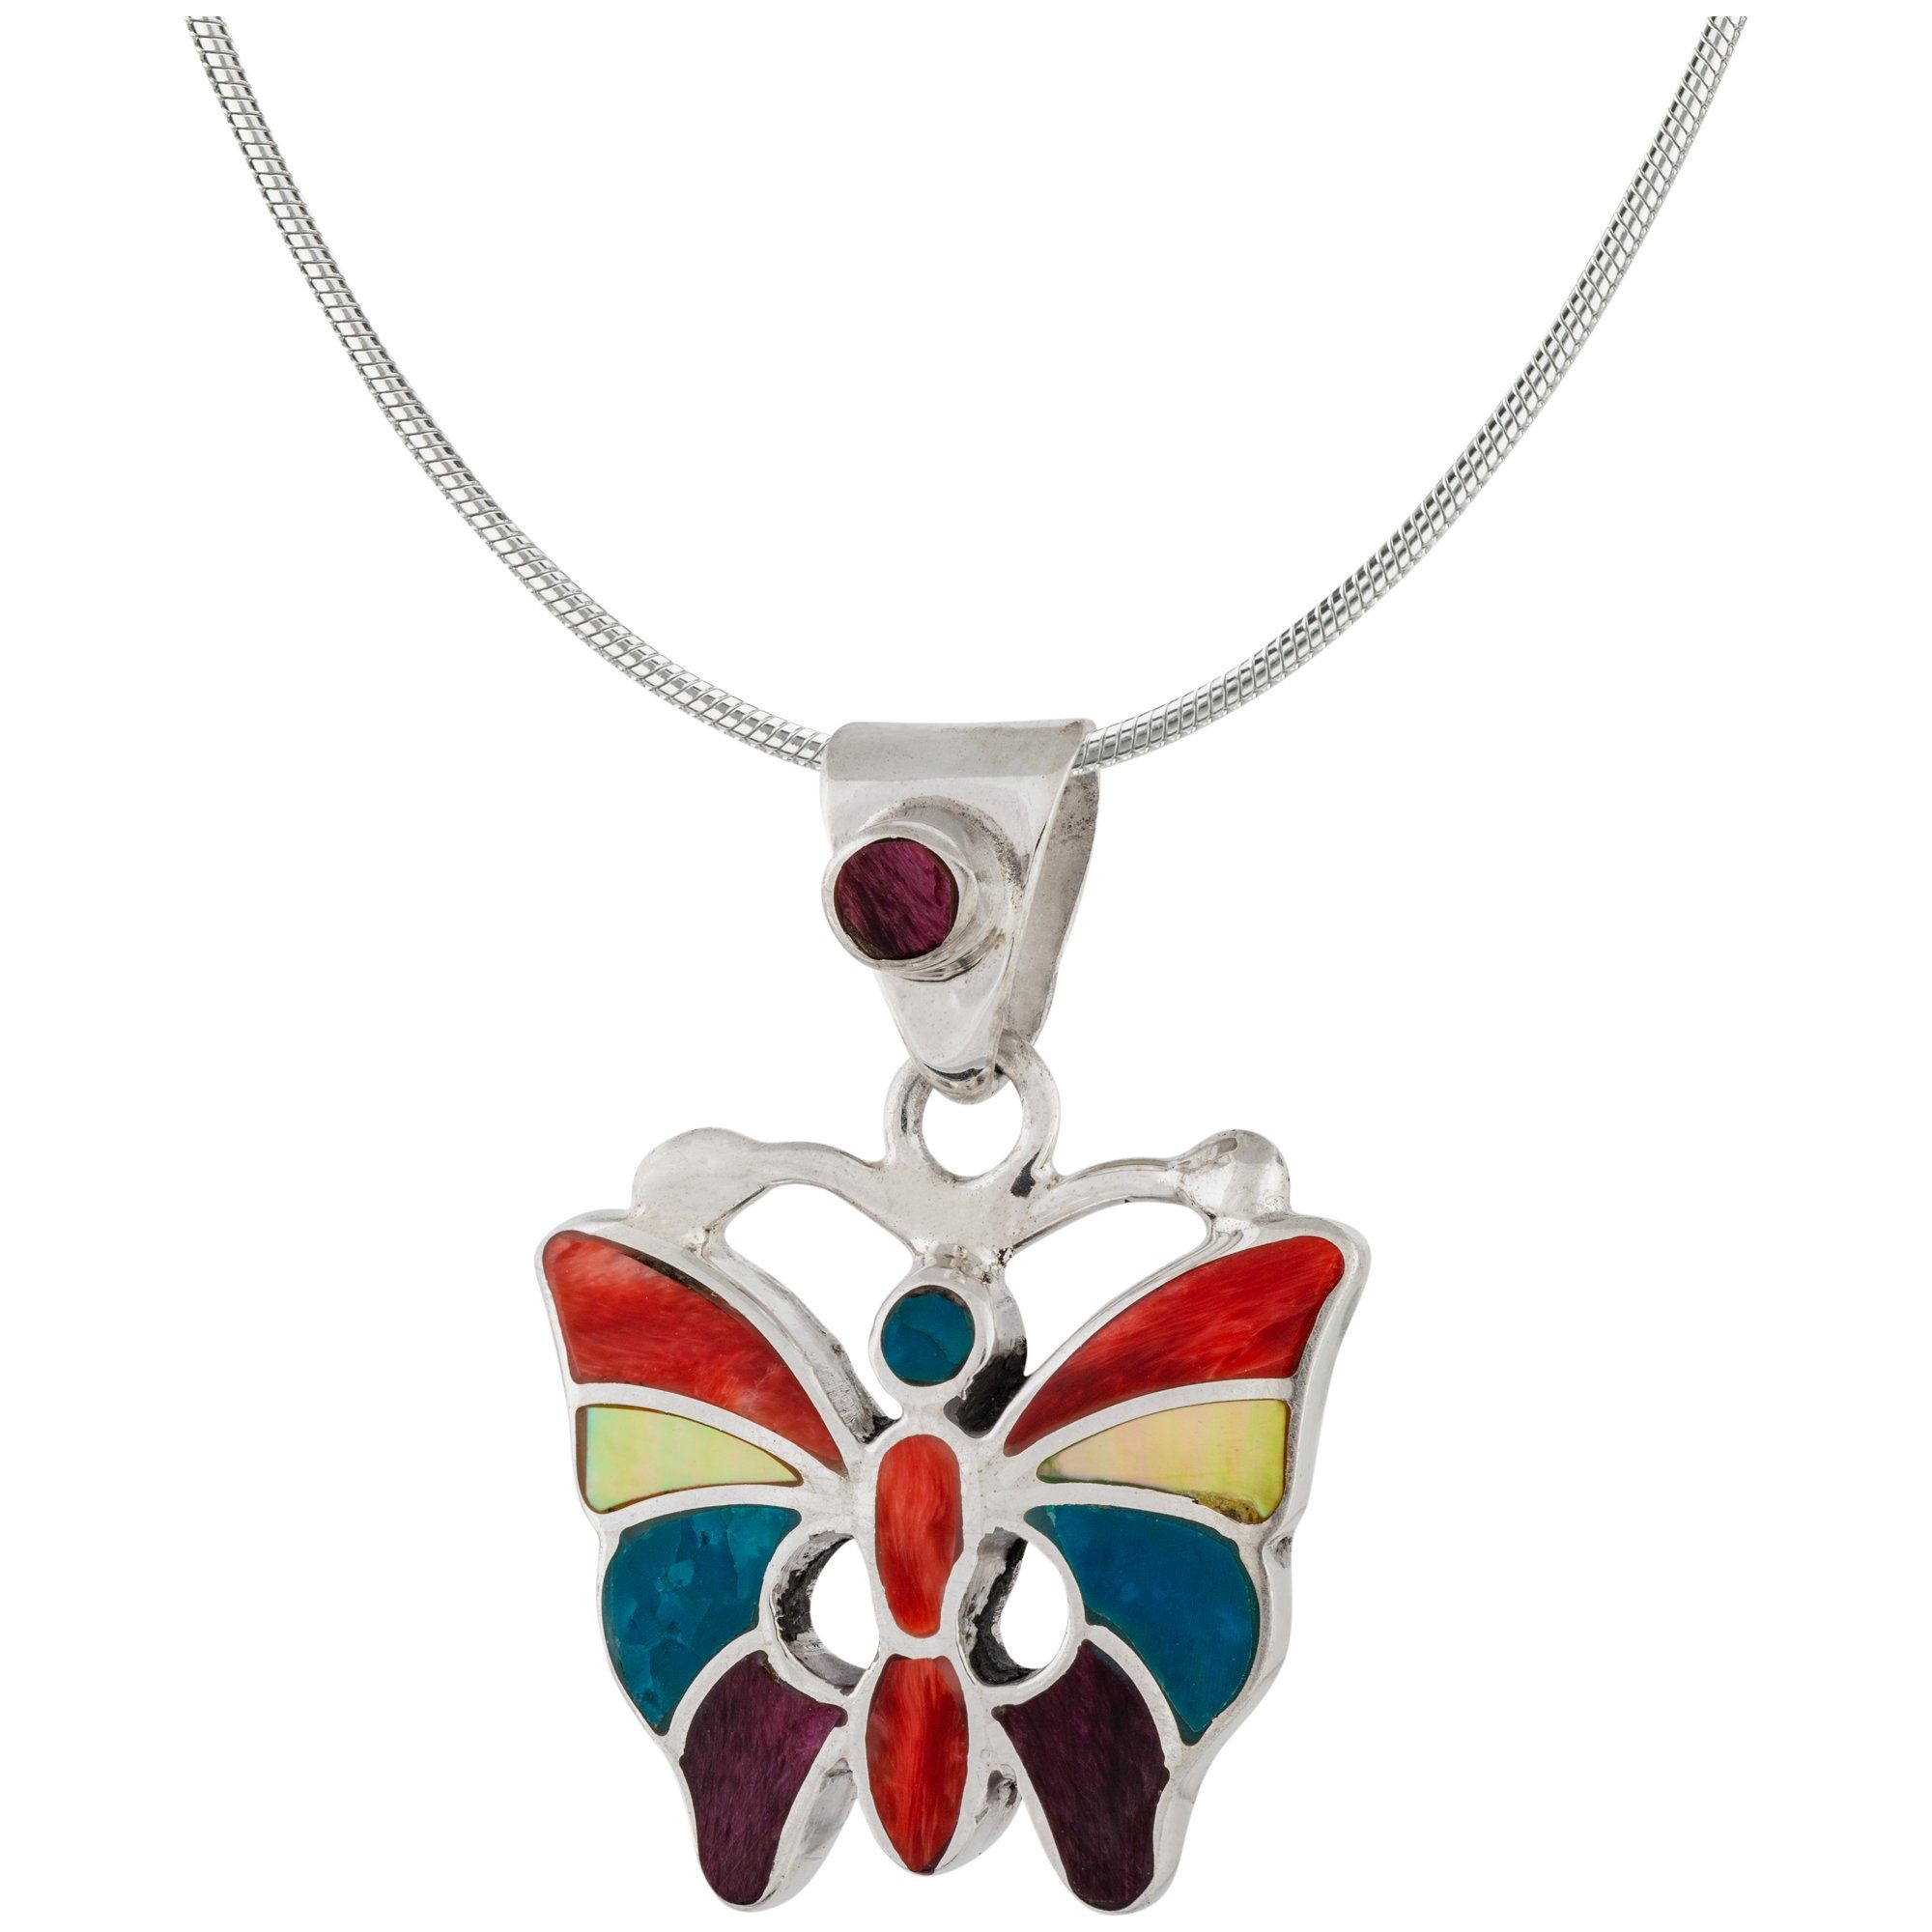 Earth's Splendor Gemstone & Sterling Necklace - Butterfly - With Sterling Cable Chain